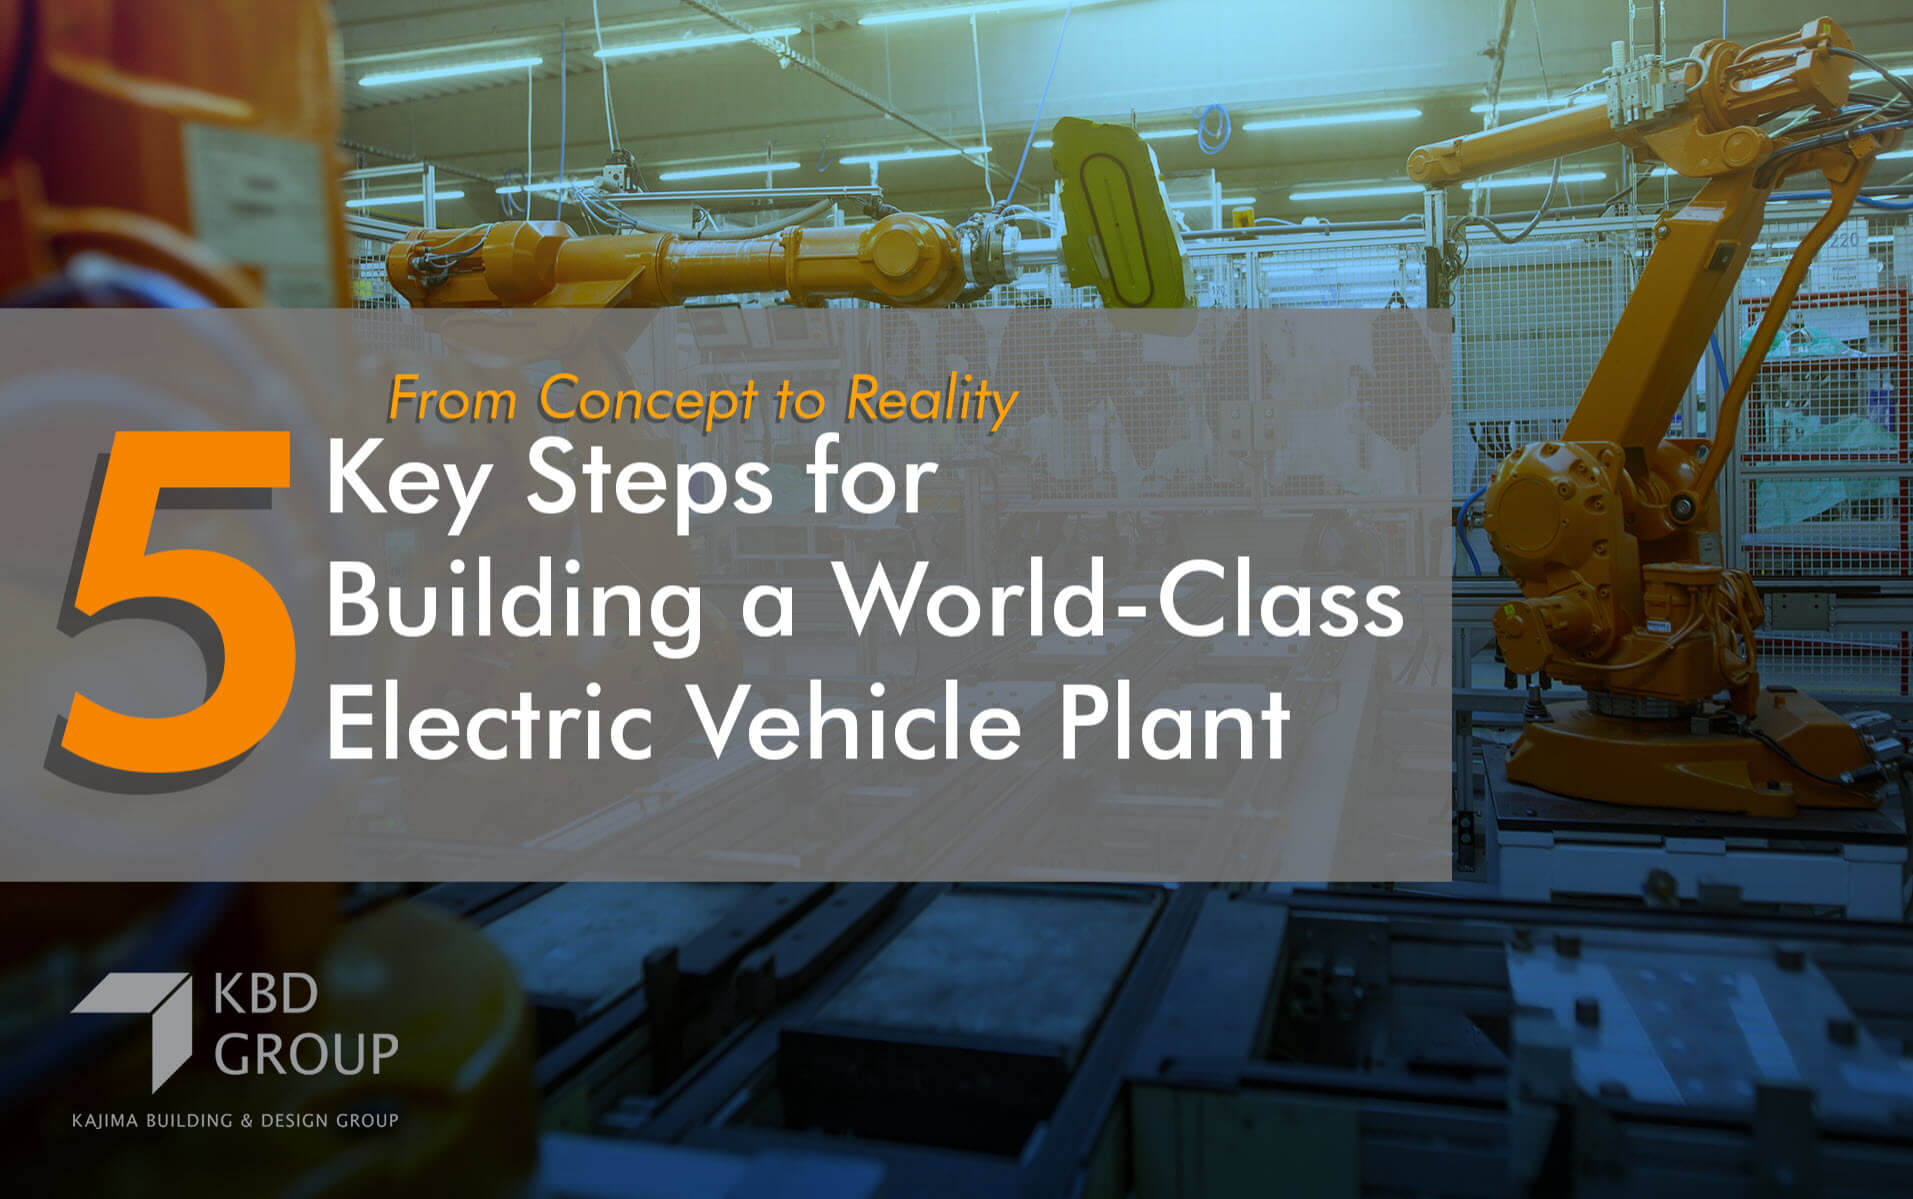 From Concept to Reality: 5 Key Steps for Building a World-Class Electric Vehicle Plant